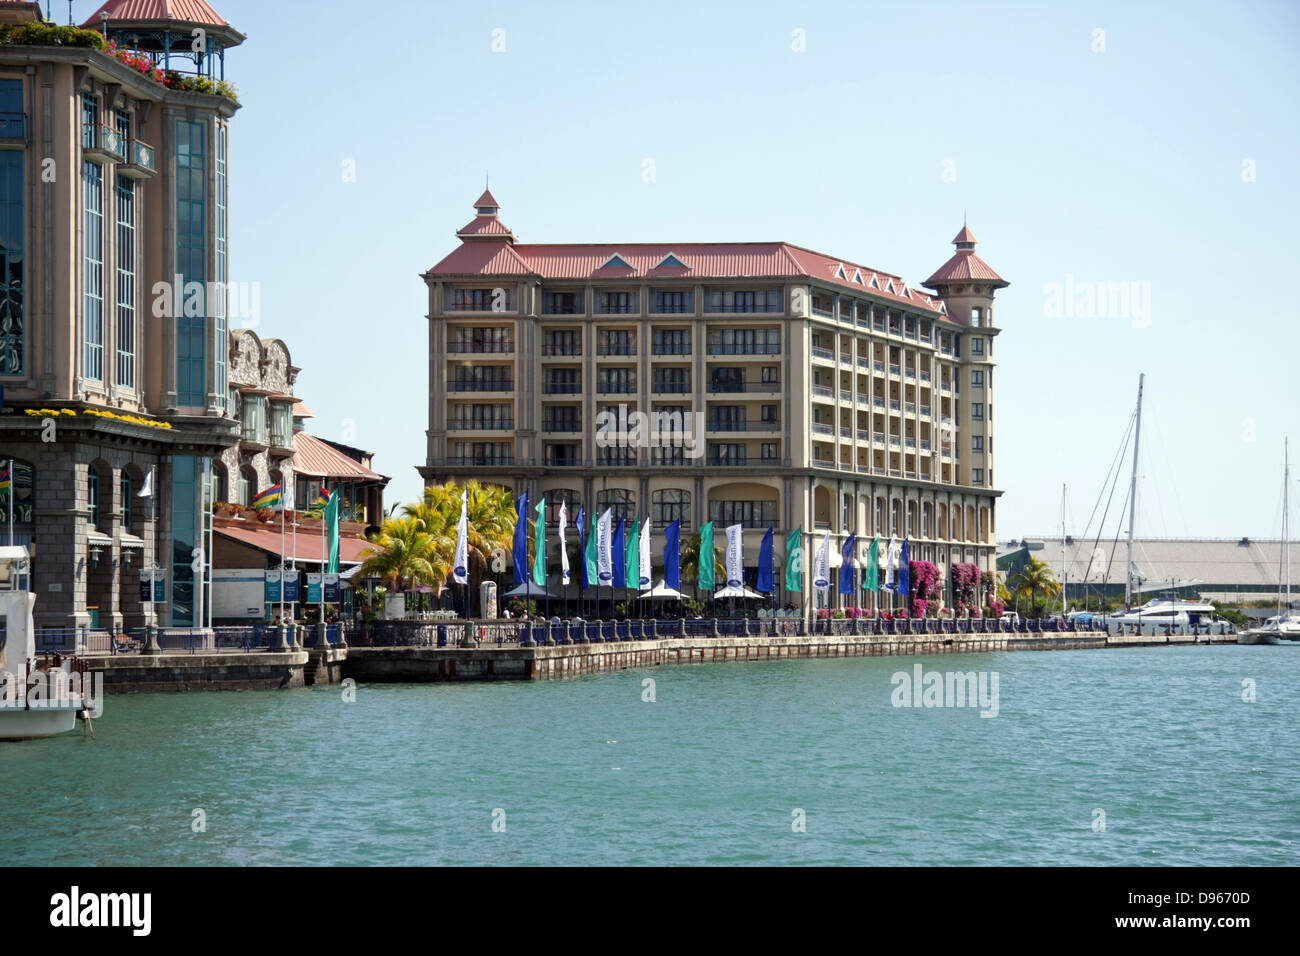 Labourdonnais Hotel on the waterfront in Port Louis, Mauritius Stock Photo